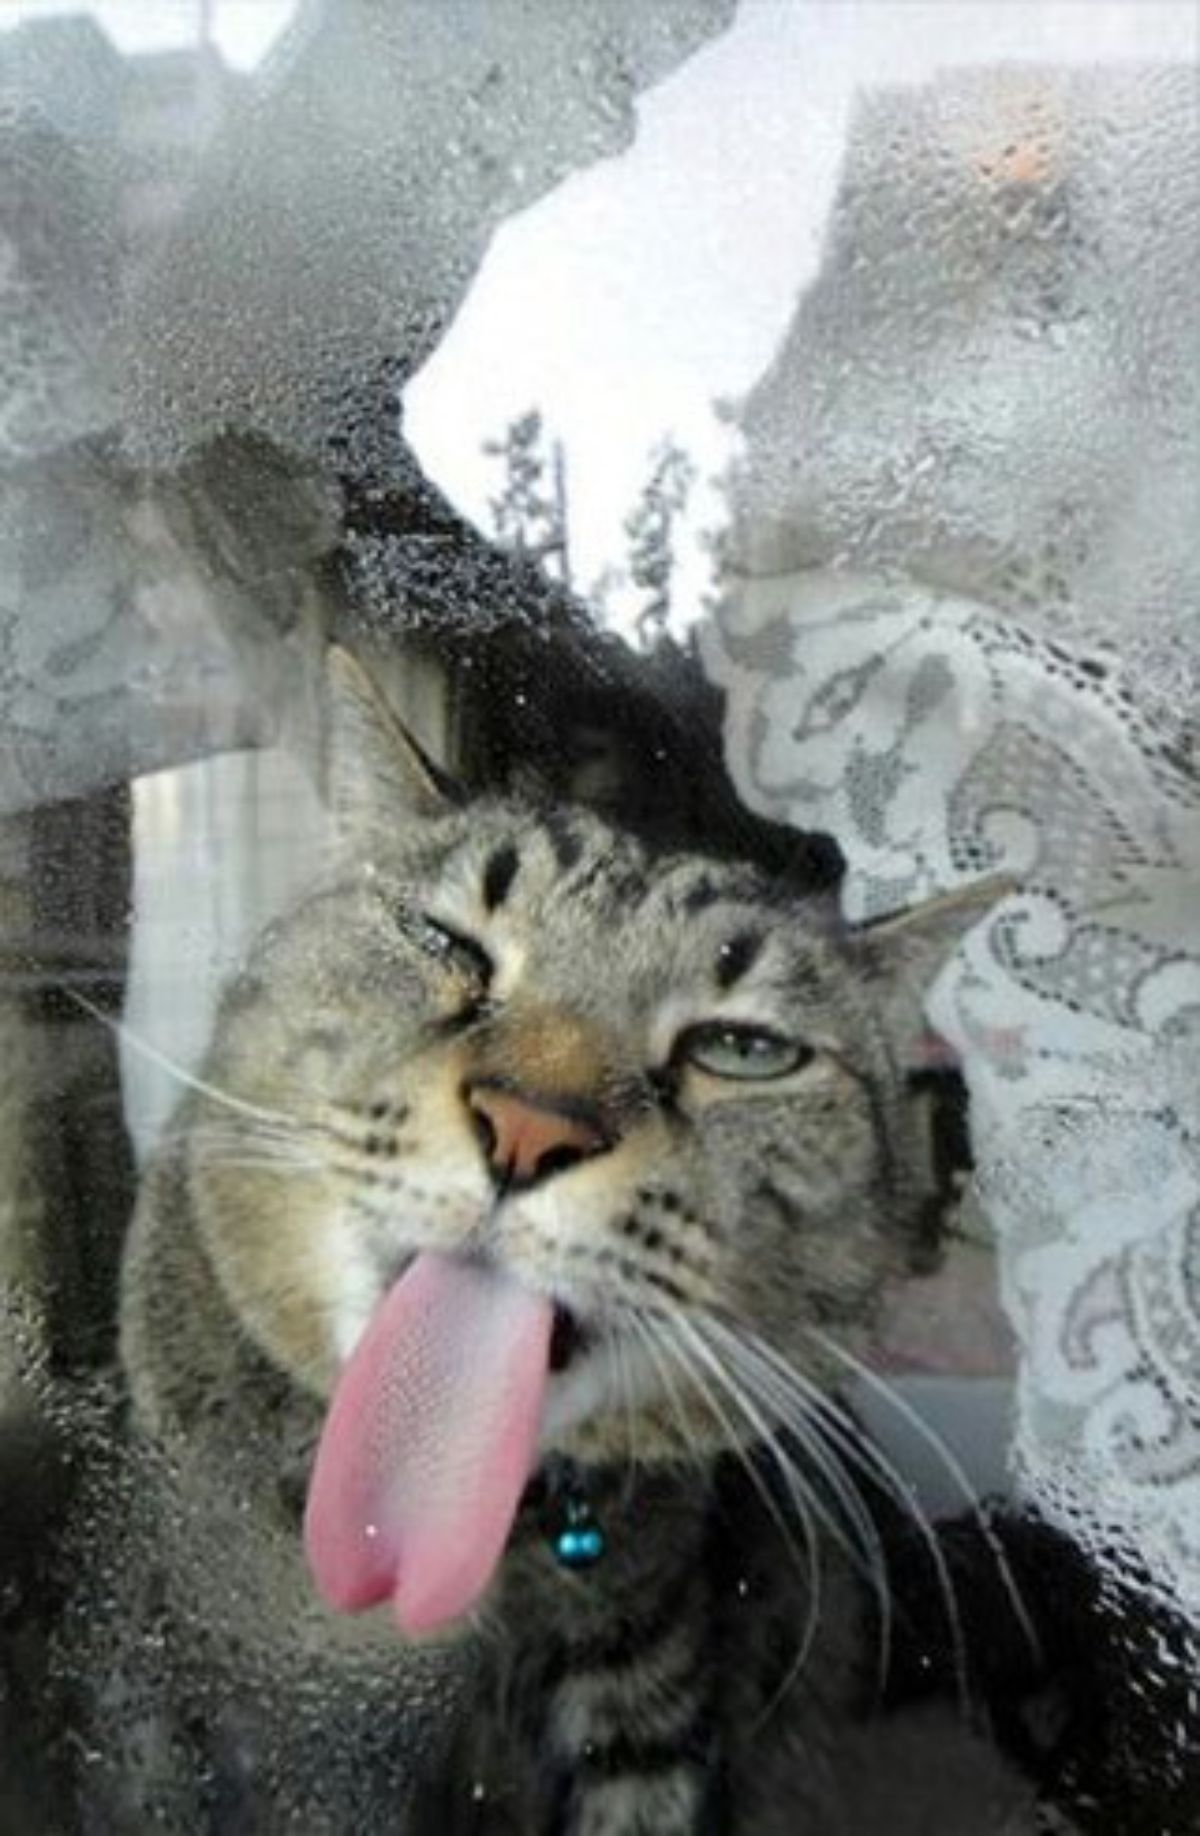 grey tabby cat licking a glass with water droplets on it